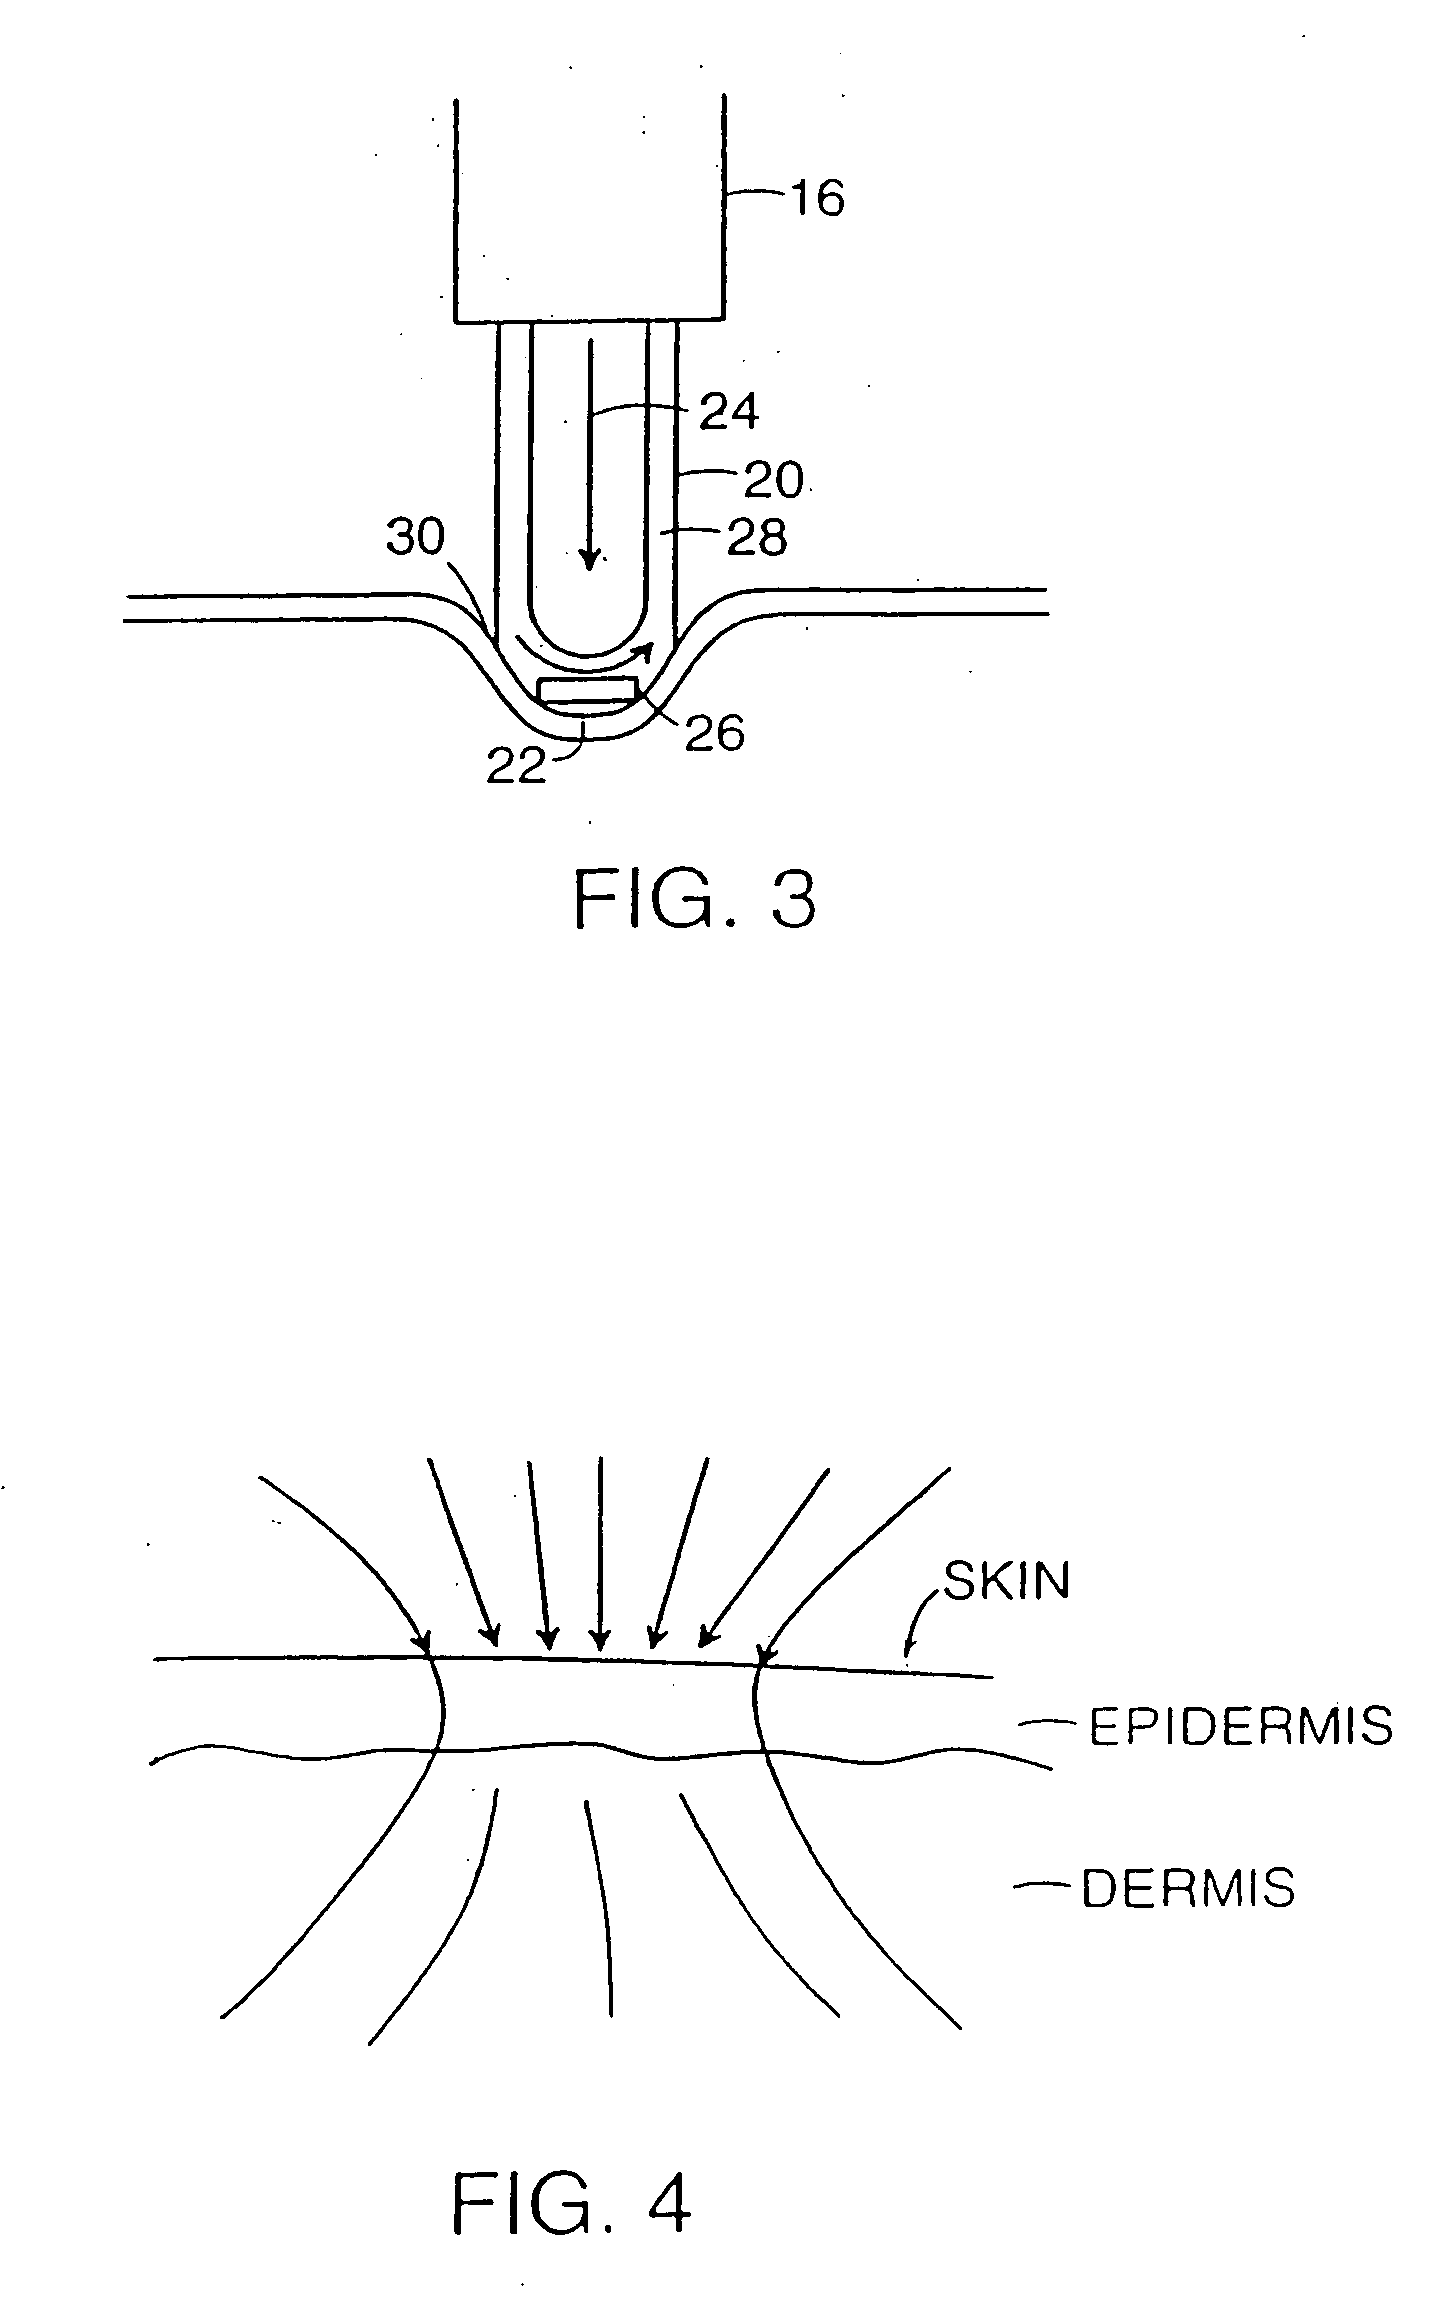 Method and apparatus for treating wrinkles in skin using radiation